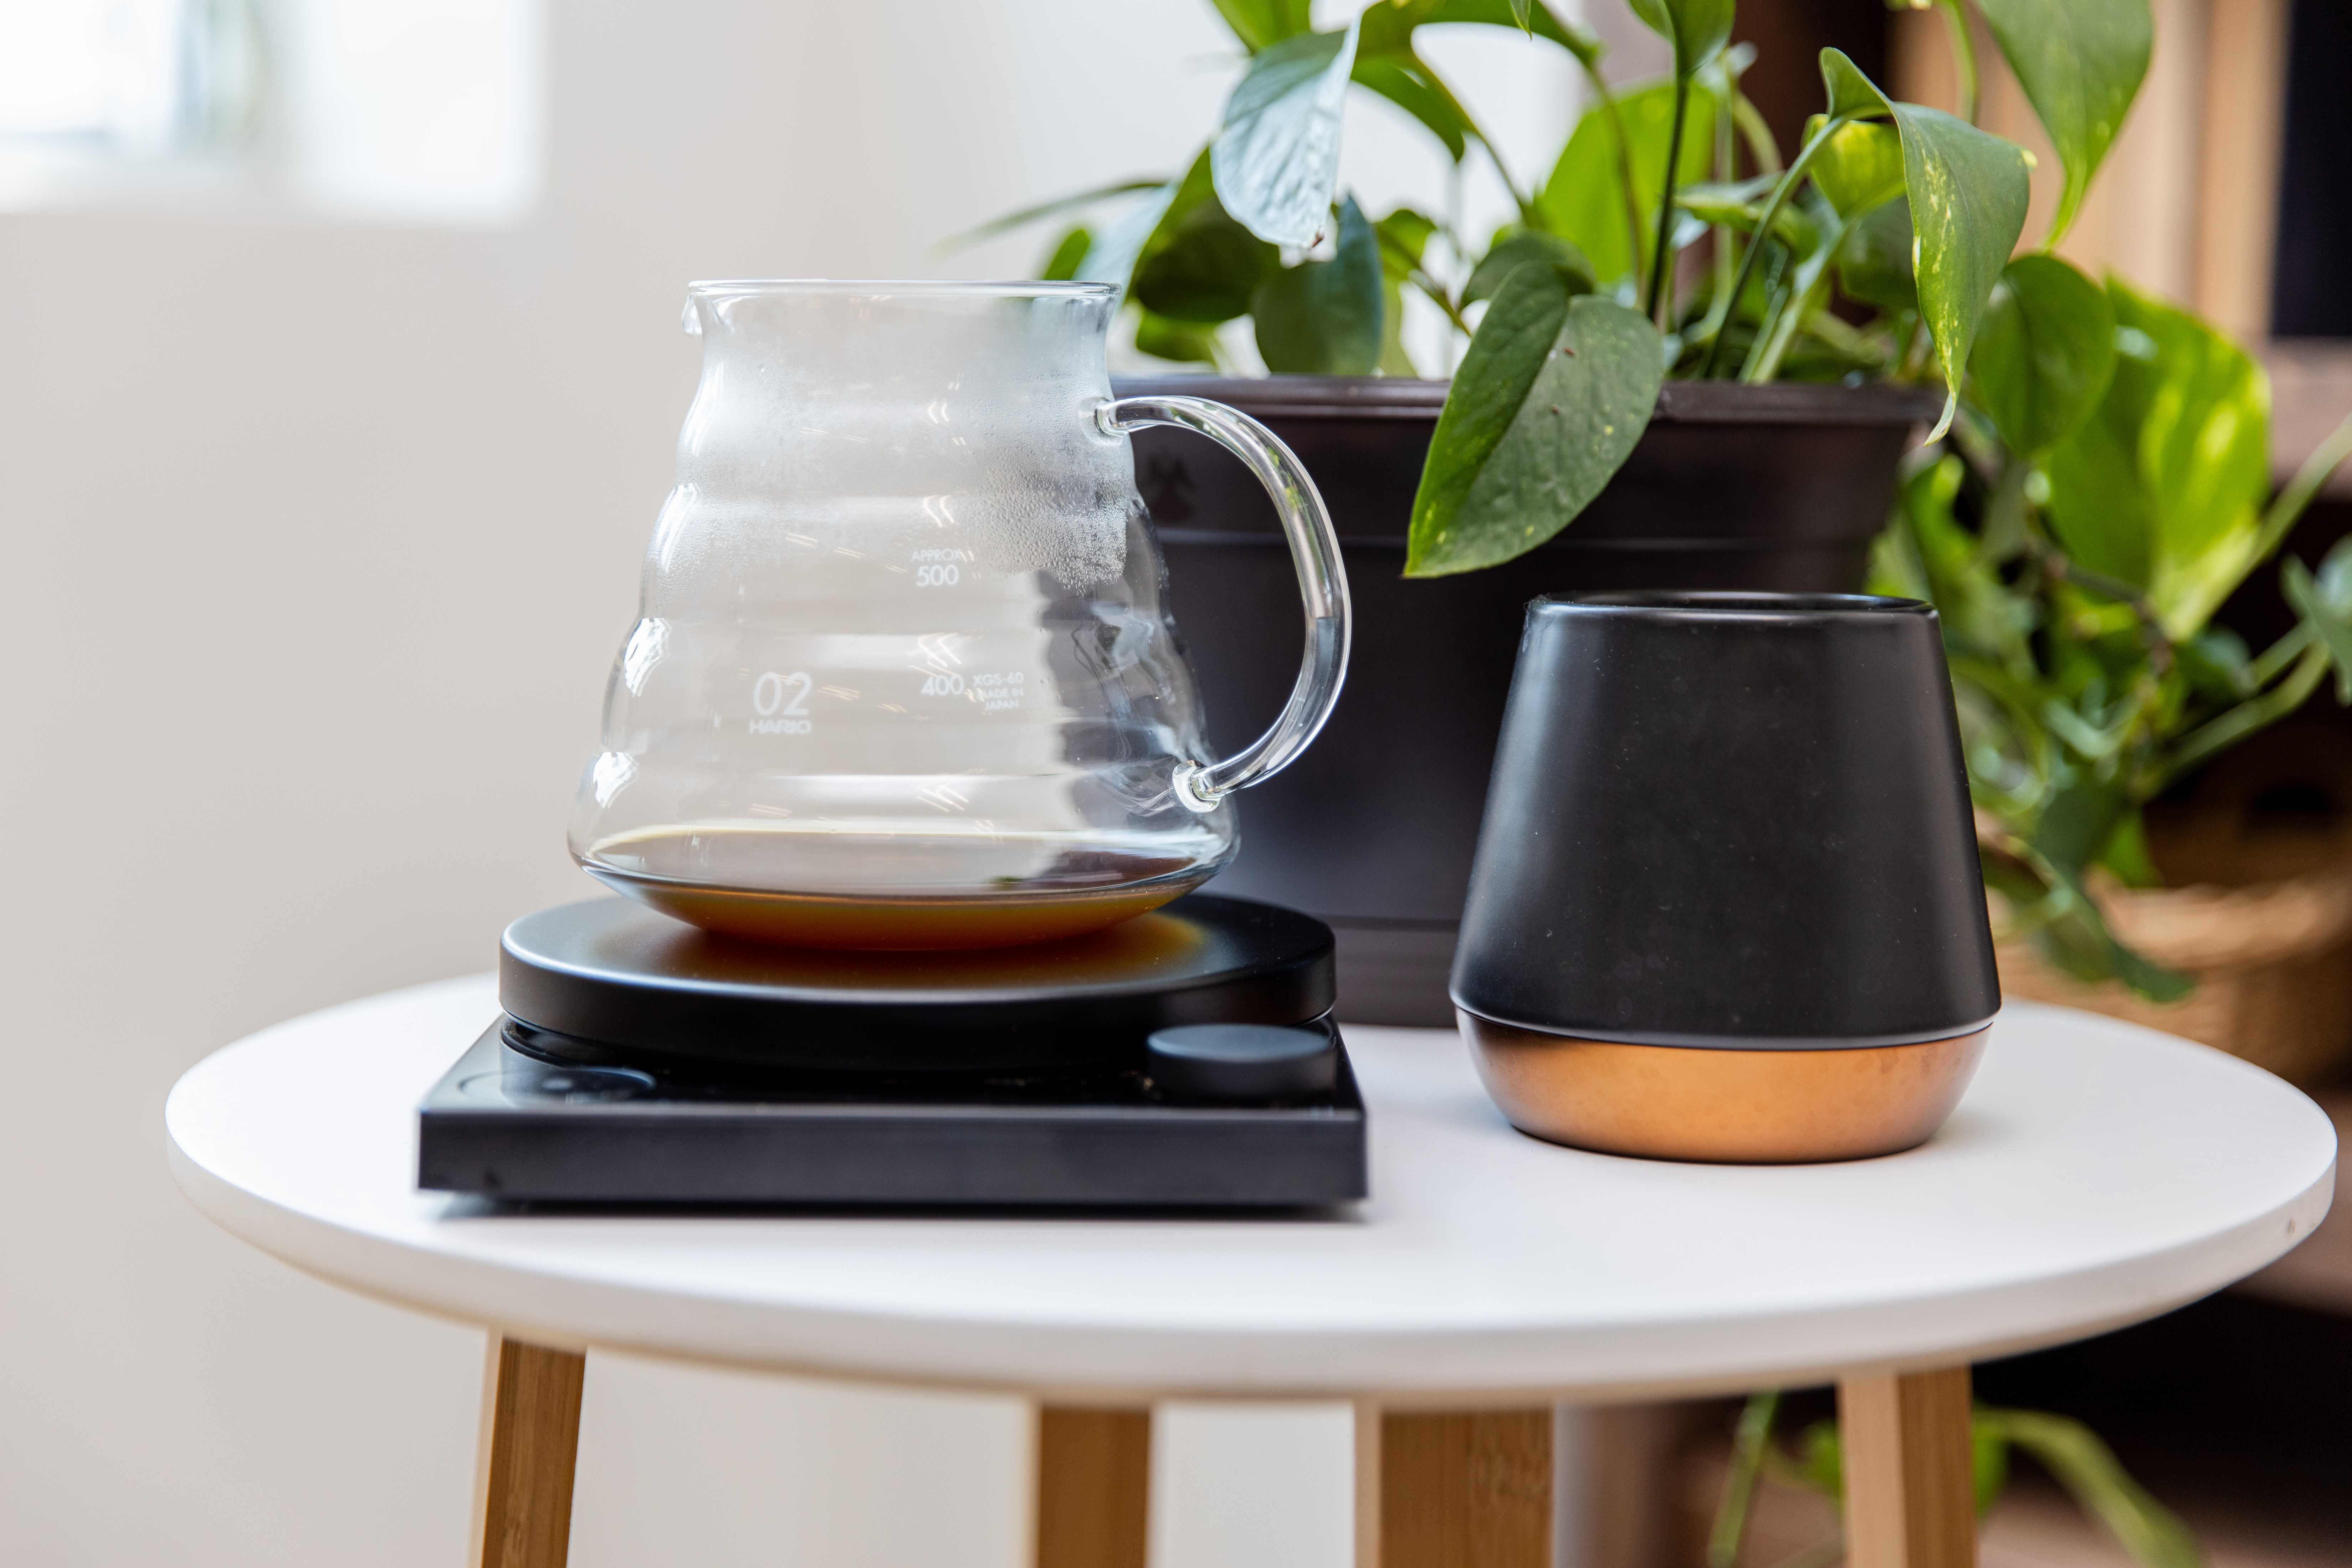 A New-Age Coffee Scale